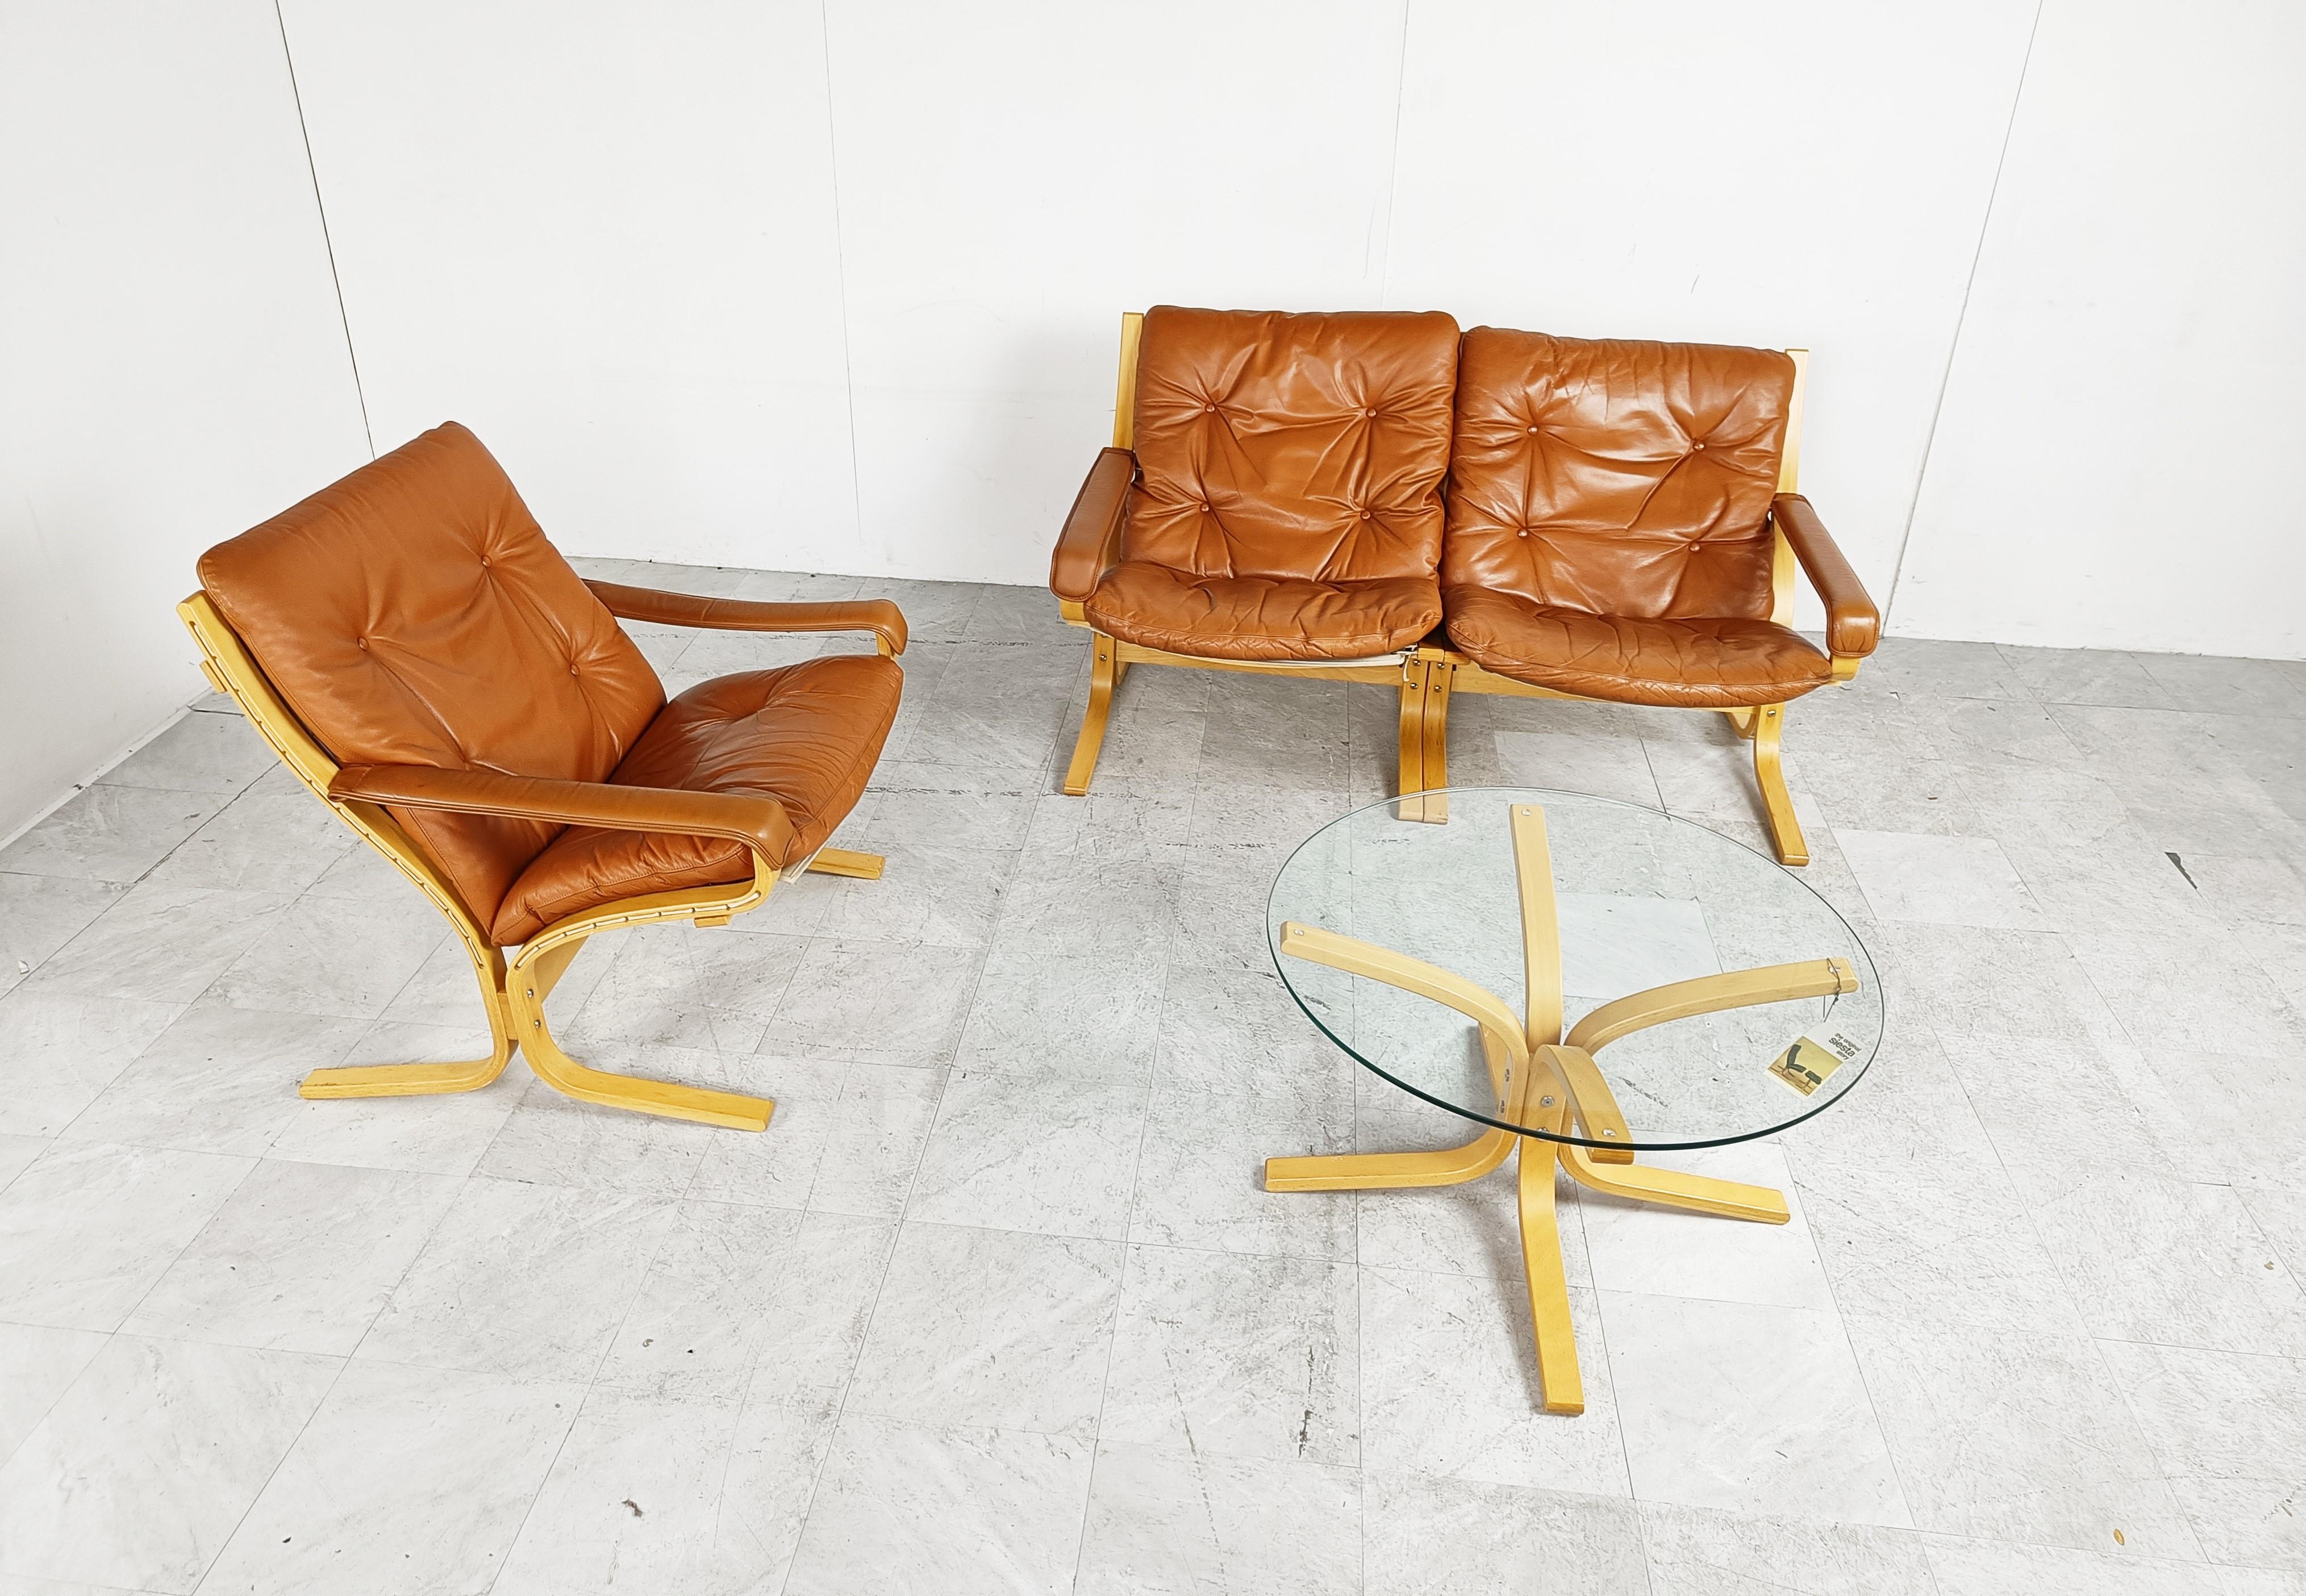 Vintage living room set designed by Ingmar Relling for Westnofa.

Beech wooden frames with brown leather cushions.

The sets consists of a two seater bench, armchair and a coffee table.

The original label is still there.

Very good and